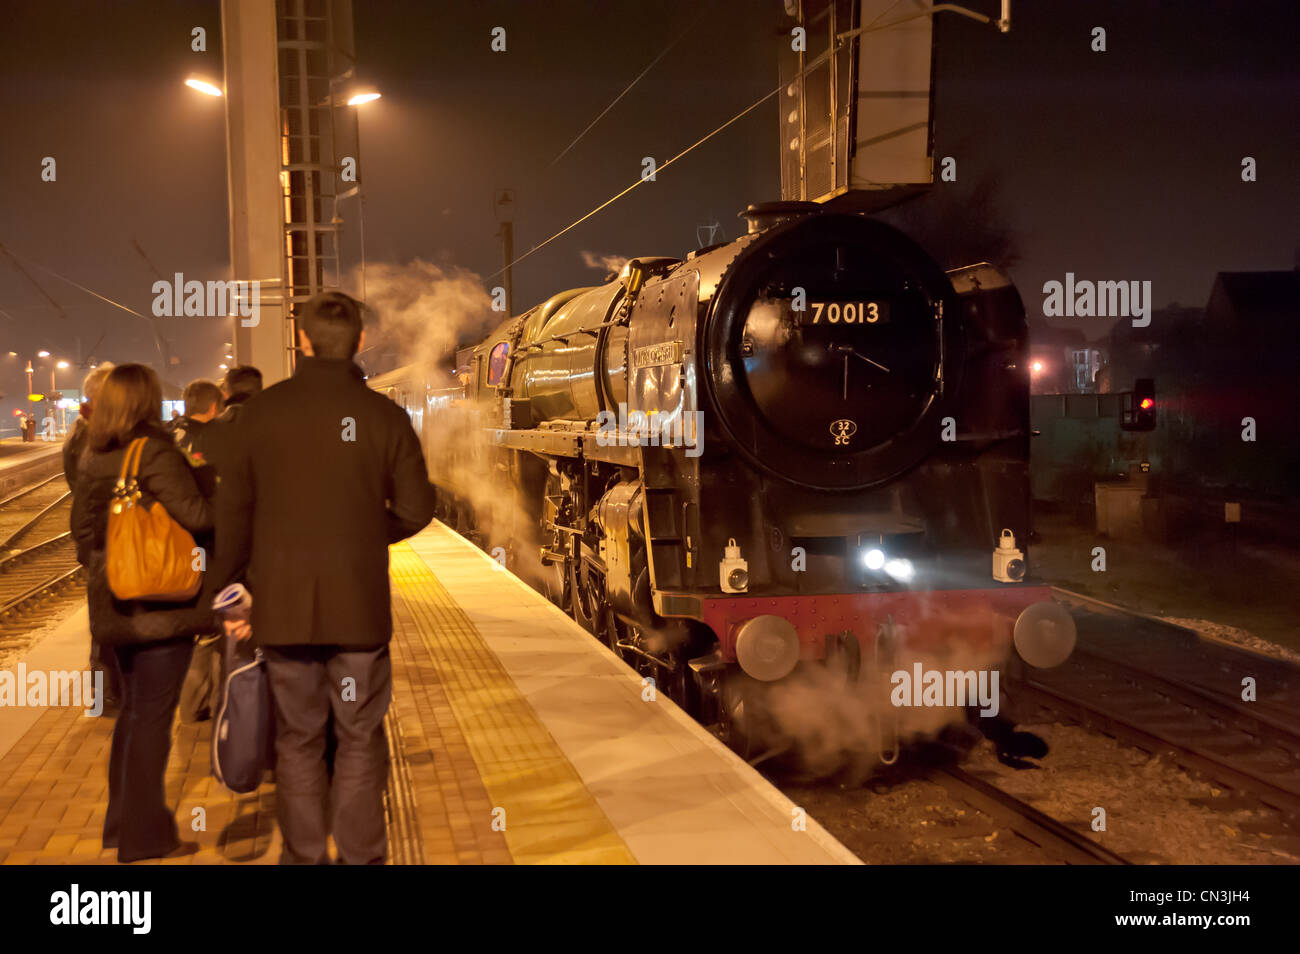 'Auld Reekie' steam special hauled by Britannia class locomotive 'Oliver Cromwell' Stock Photo